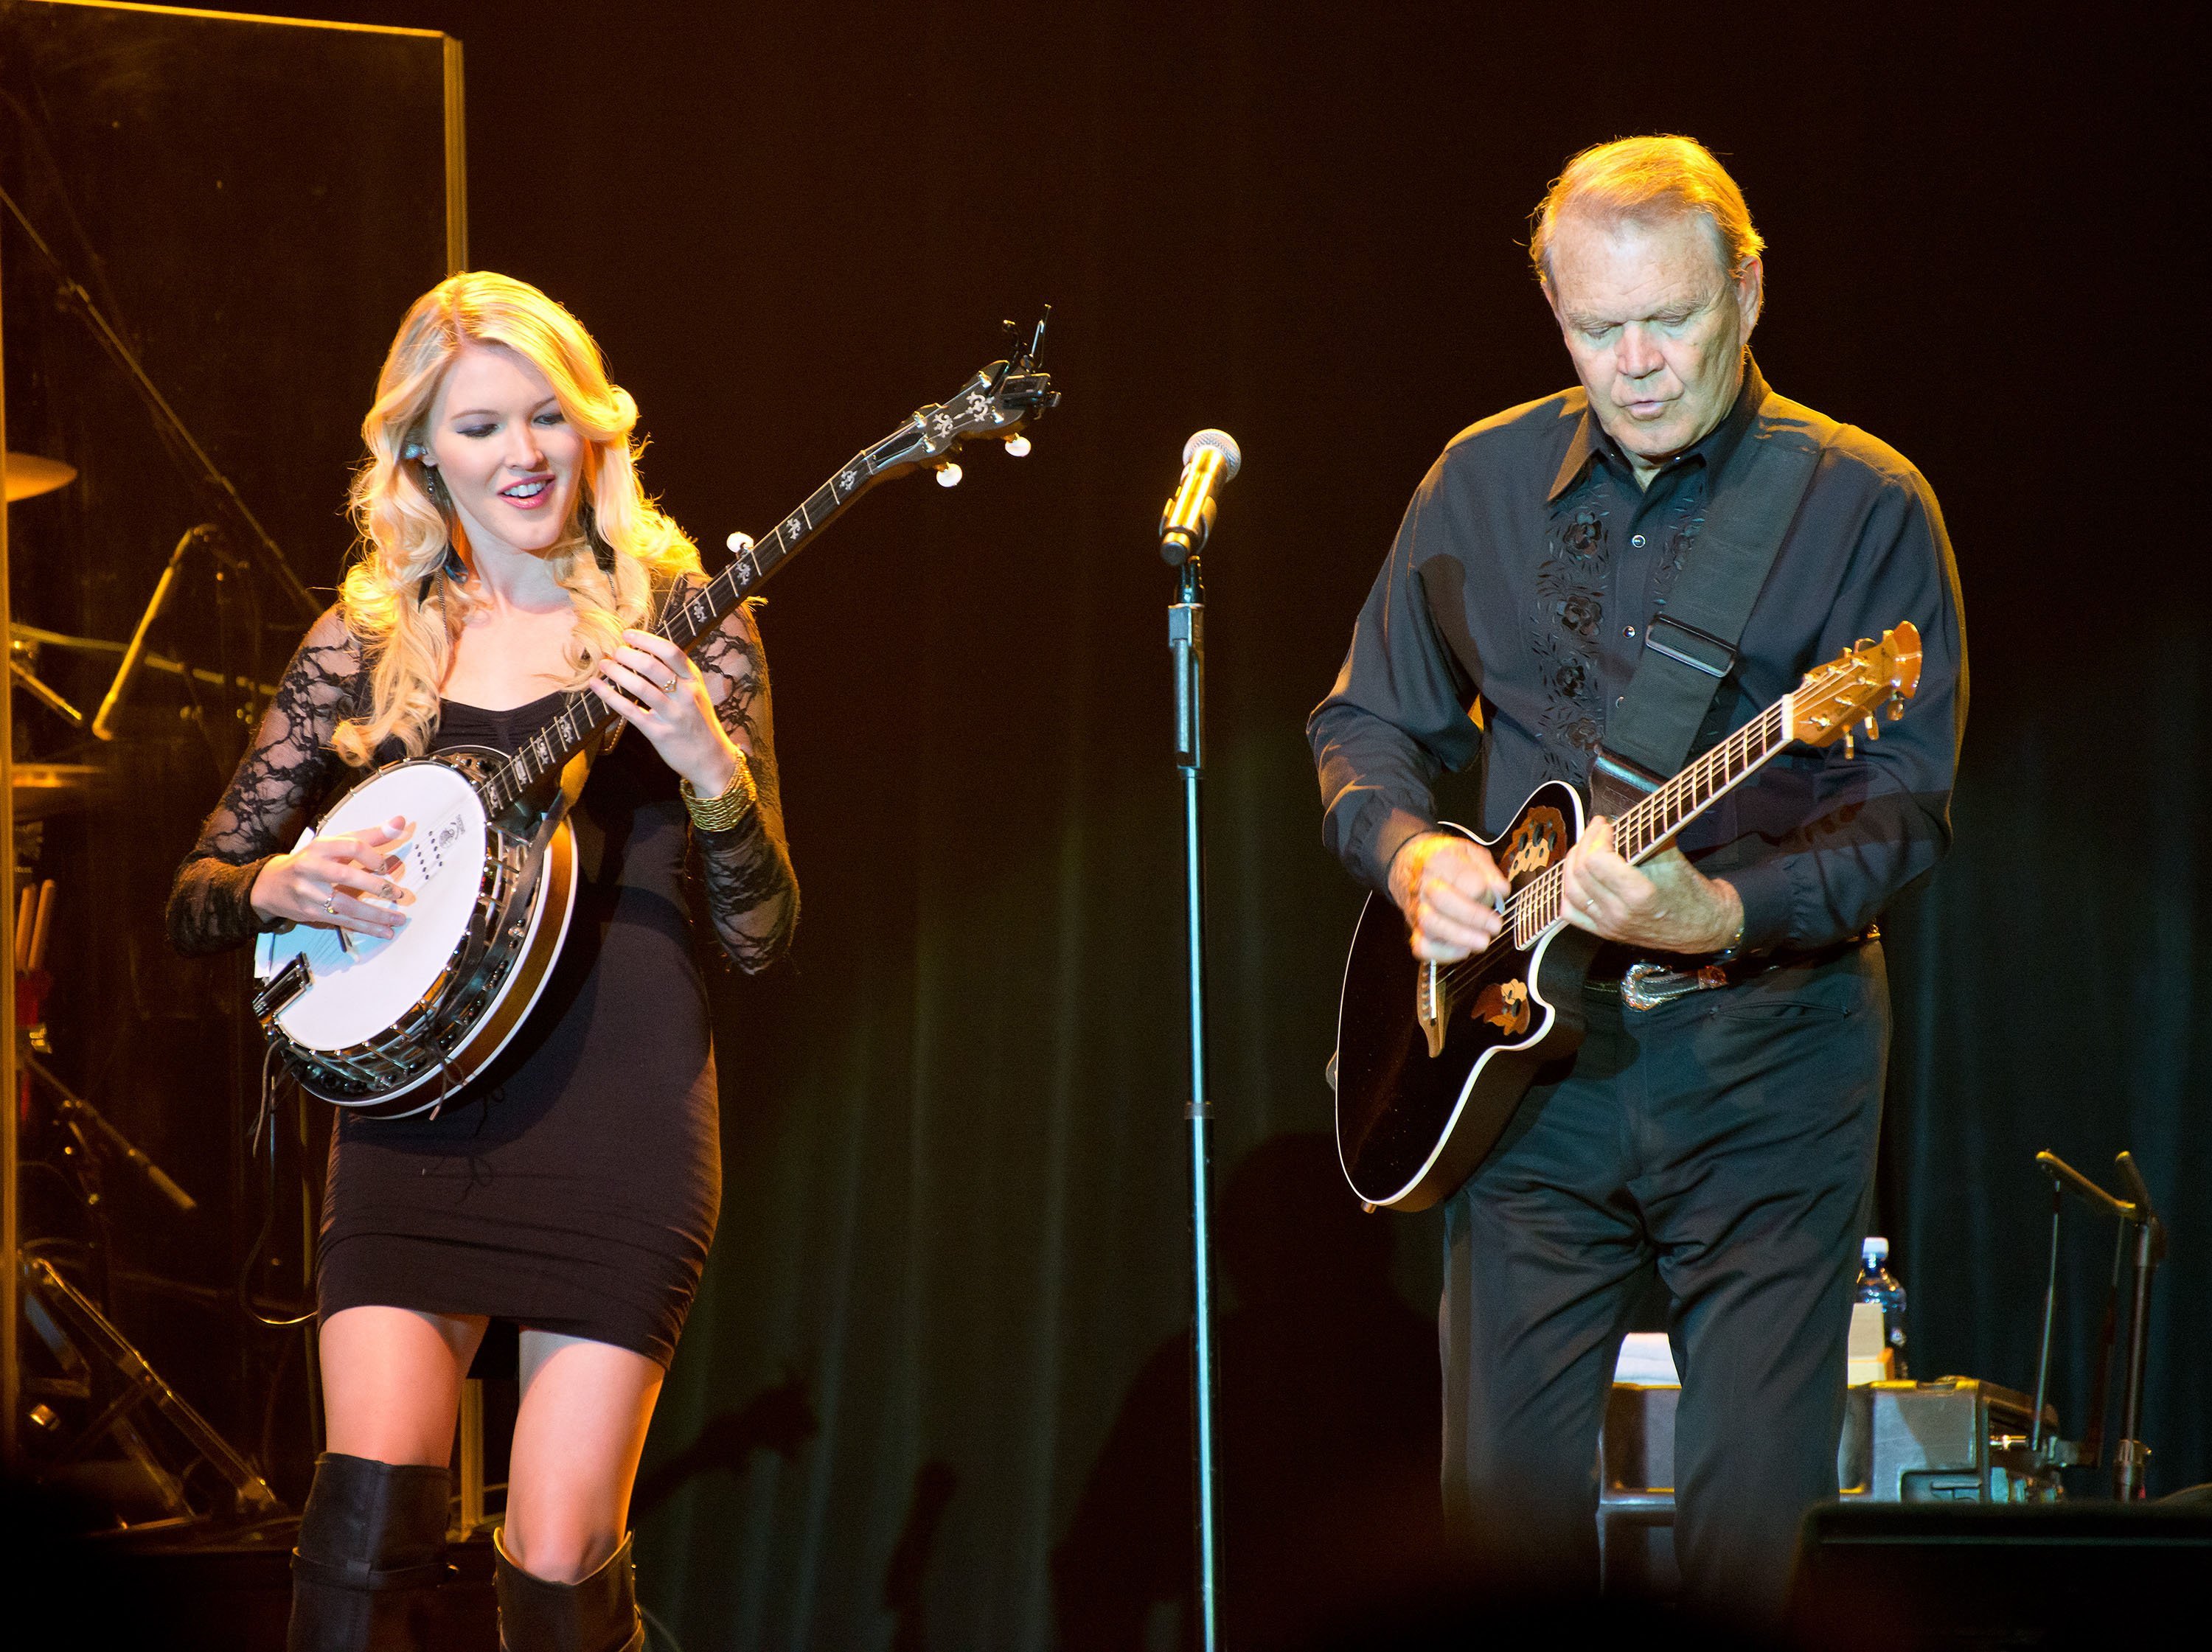 Glen Campbell on stage with he & Kim’s daughter Ashley during his Goodbye Tour in Albuquerque, New Mexico on July 29, 2012. |Photo: Getty Images